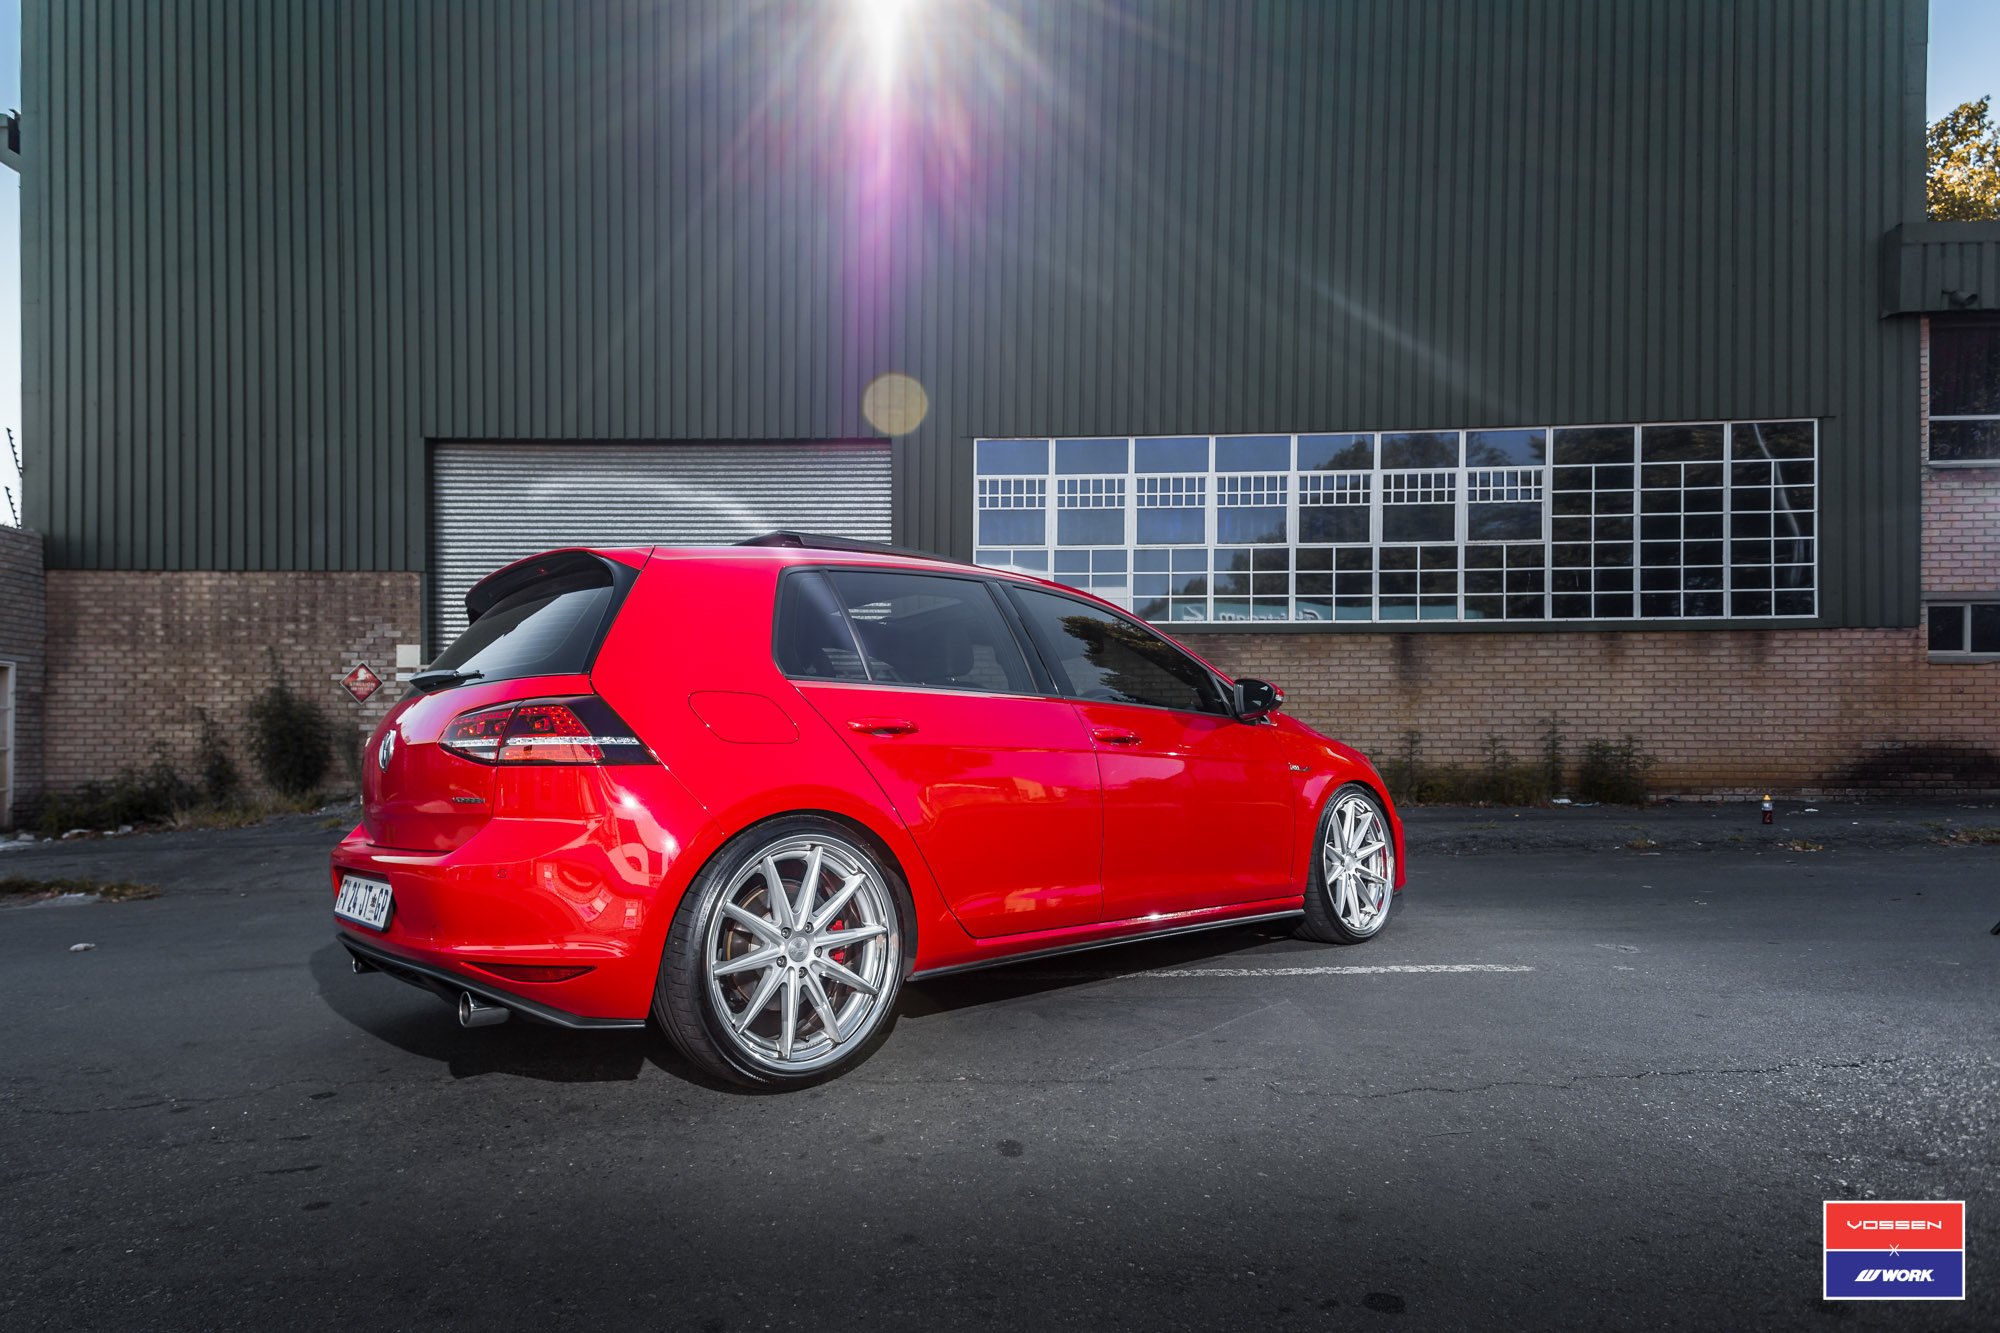 Roofline Spoiler on Red VW Golf - Photo by Vossen